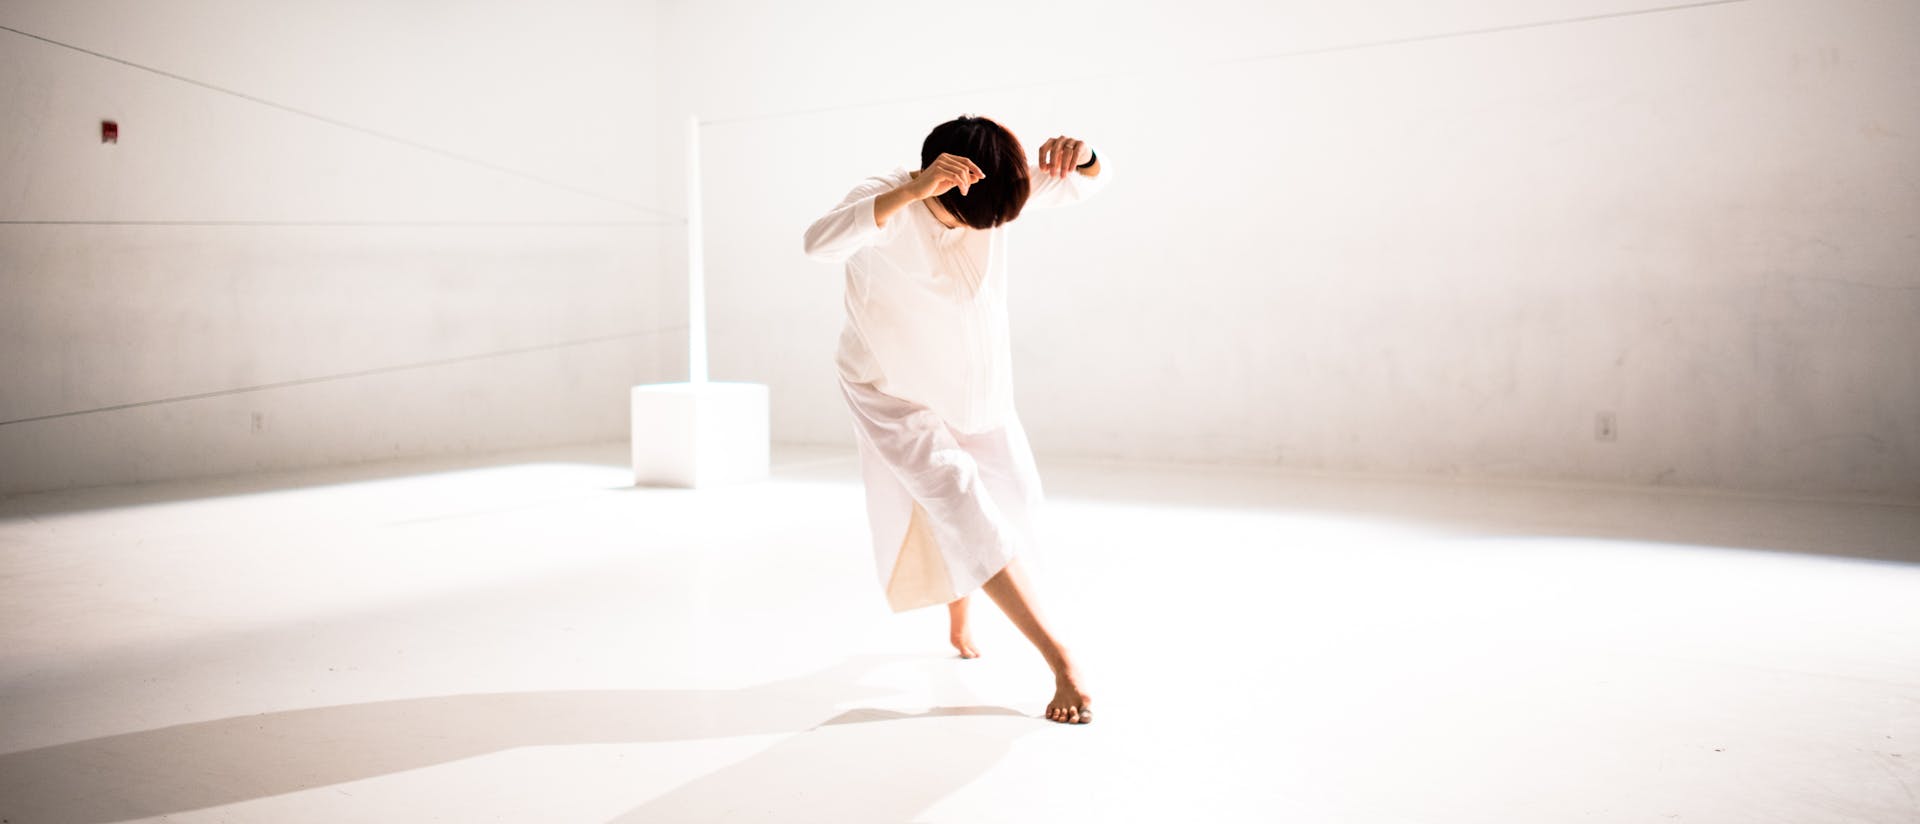 Hsiao-Jou Tang is centered, dancing in a brightly lit, bare white room. She is bent forward as she steps, head tilted down, with her elbows raised by the sides of her head. She is wearing a long sleeved, loose white dress.